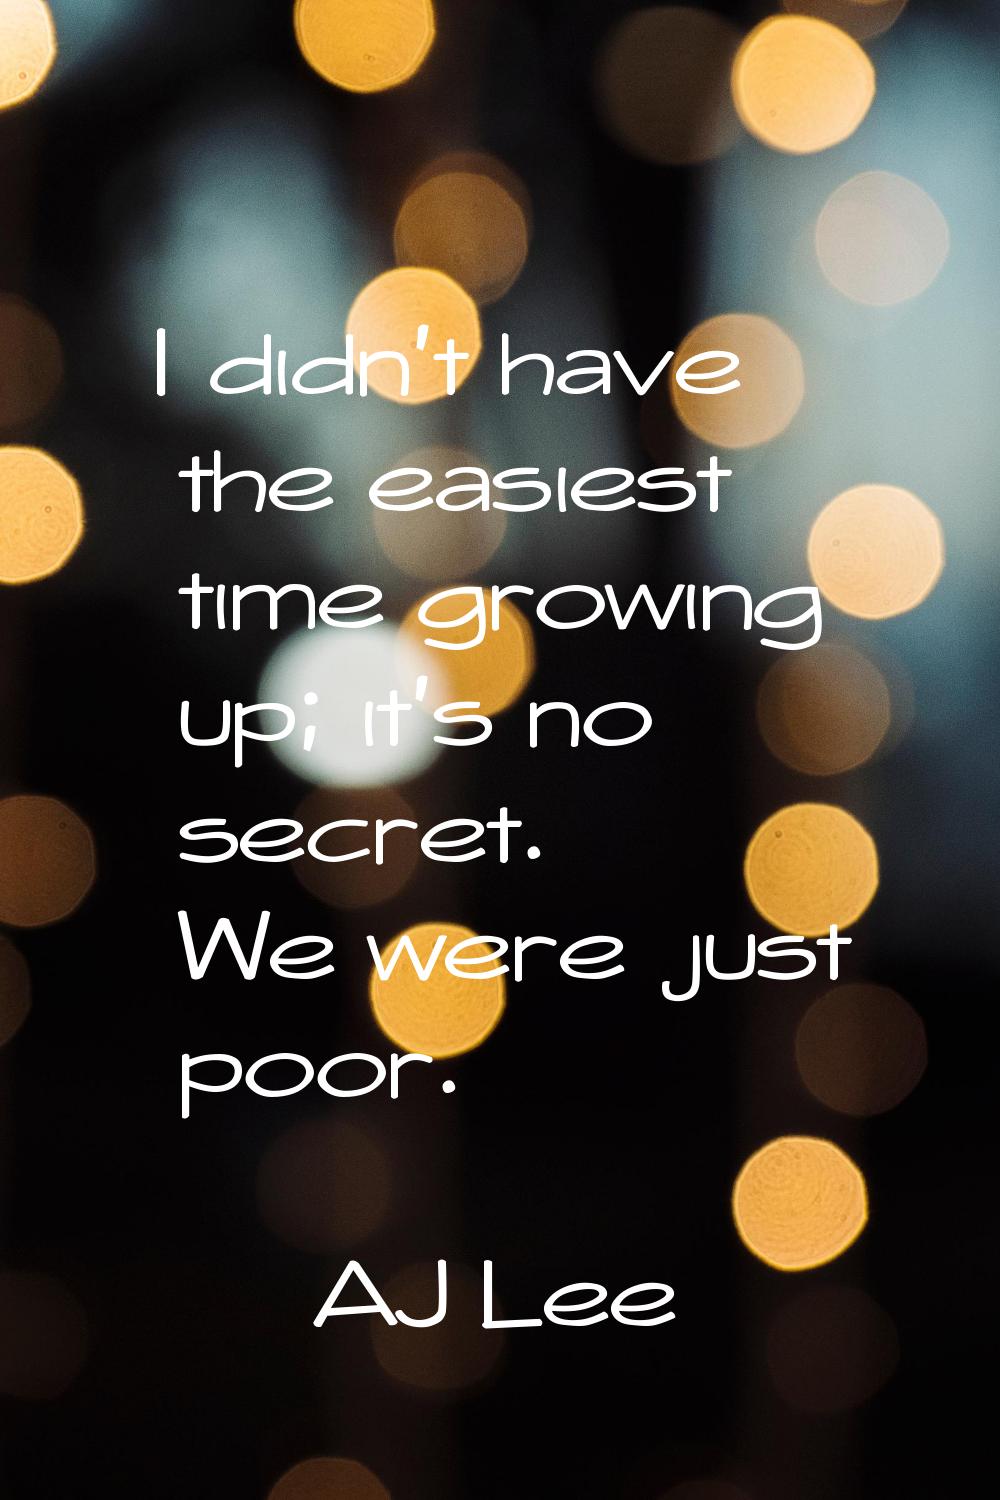 I didn't have the easiest time growing up; it's no secret. We were just poor.